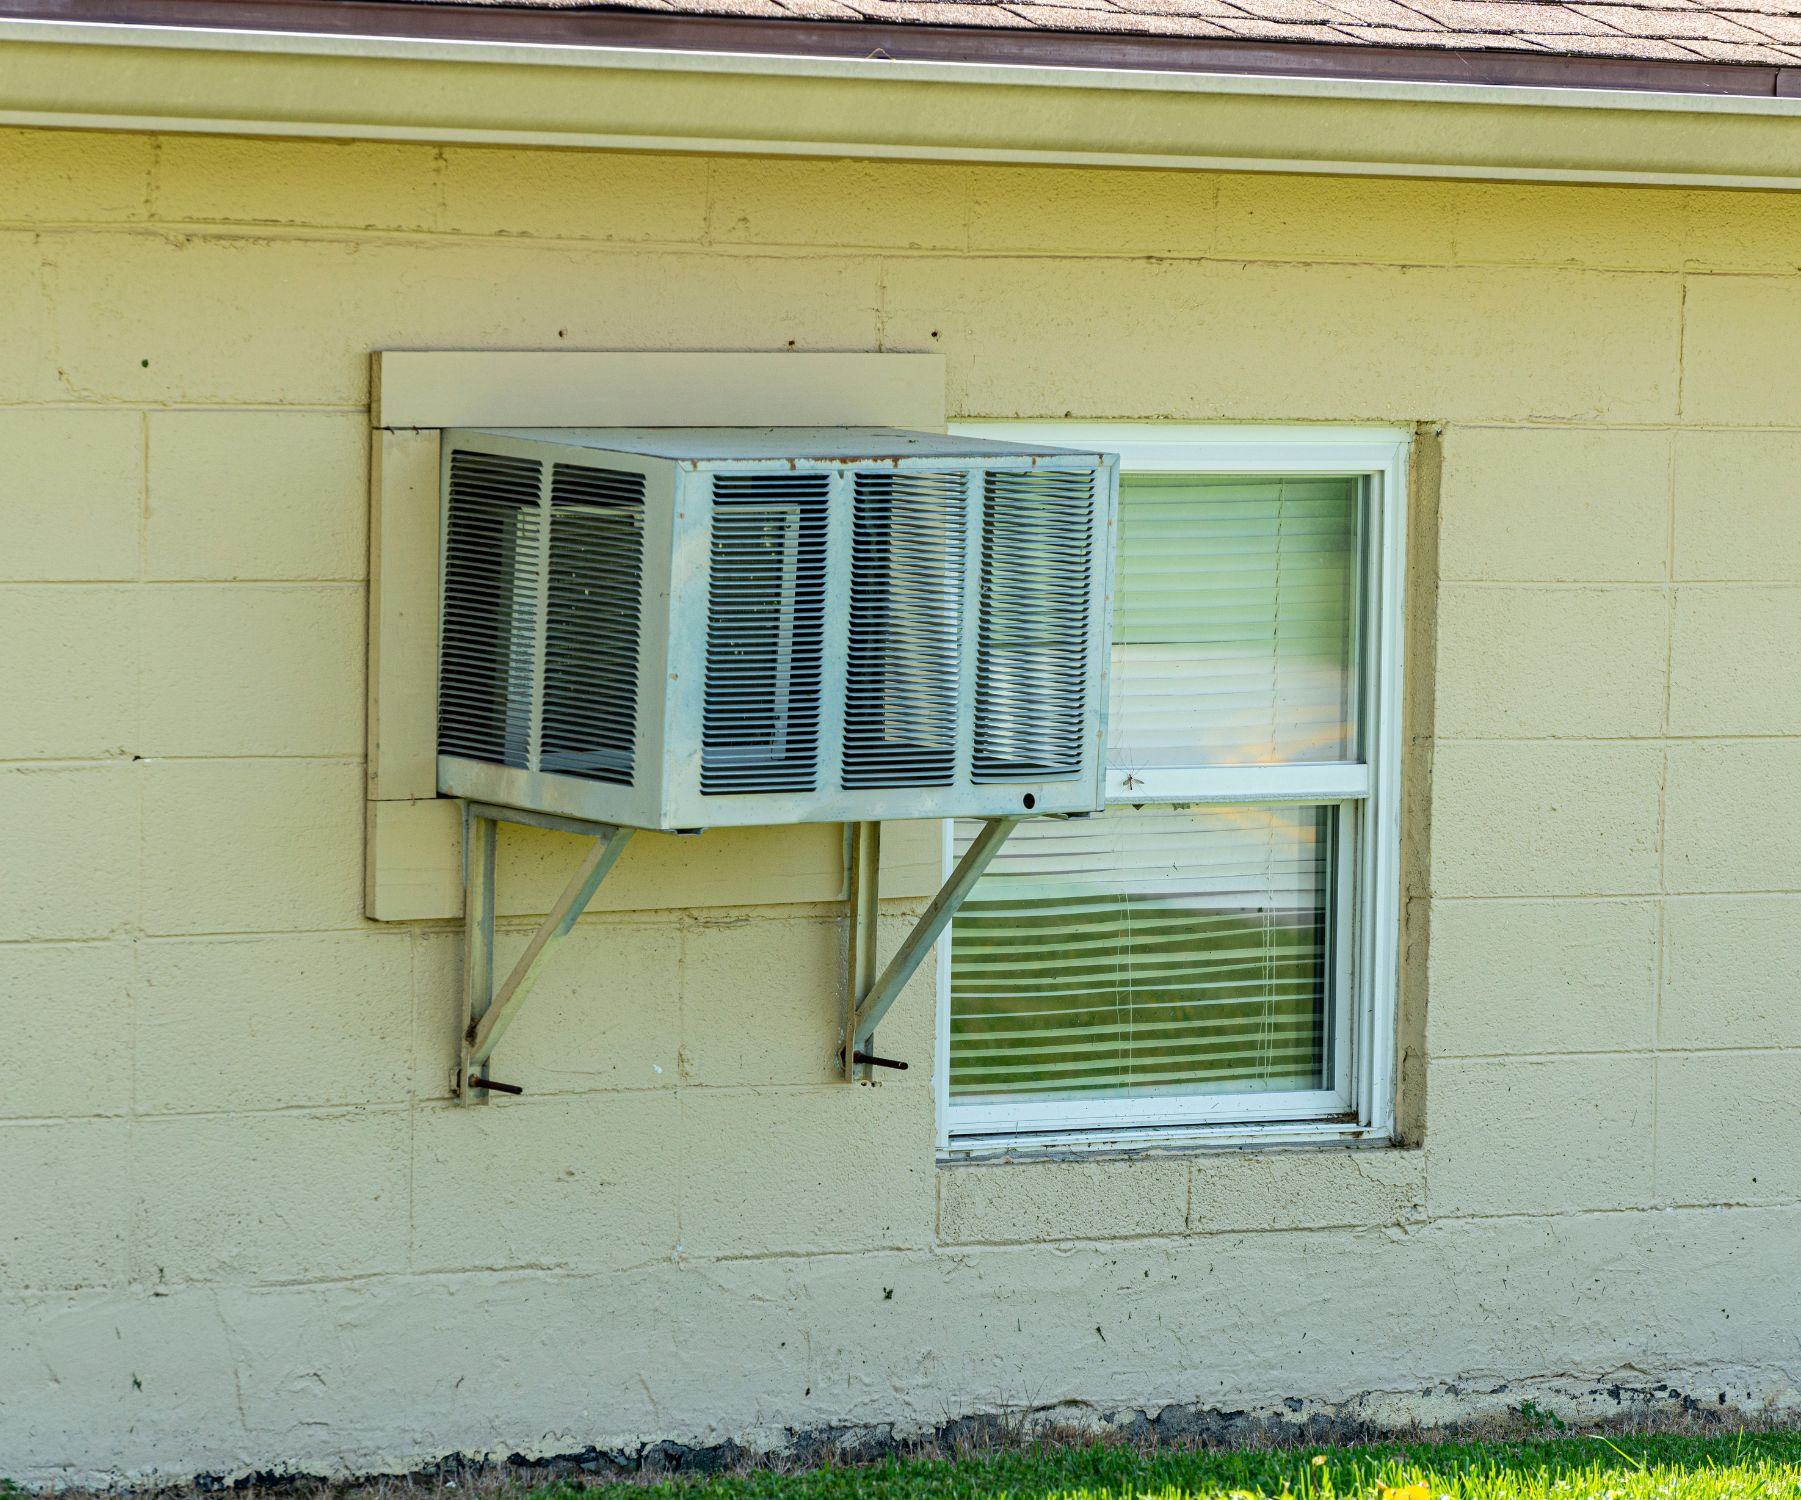 AC Window Vs Through the Wall. Is there a difference?